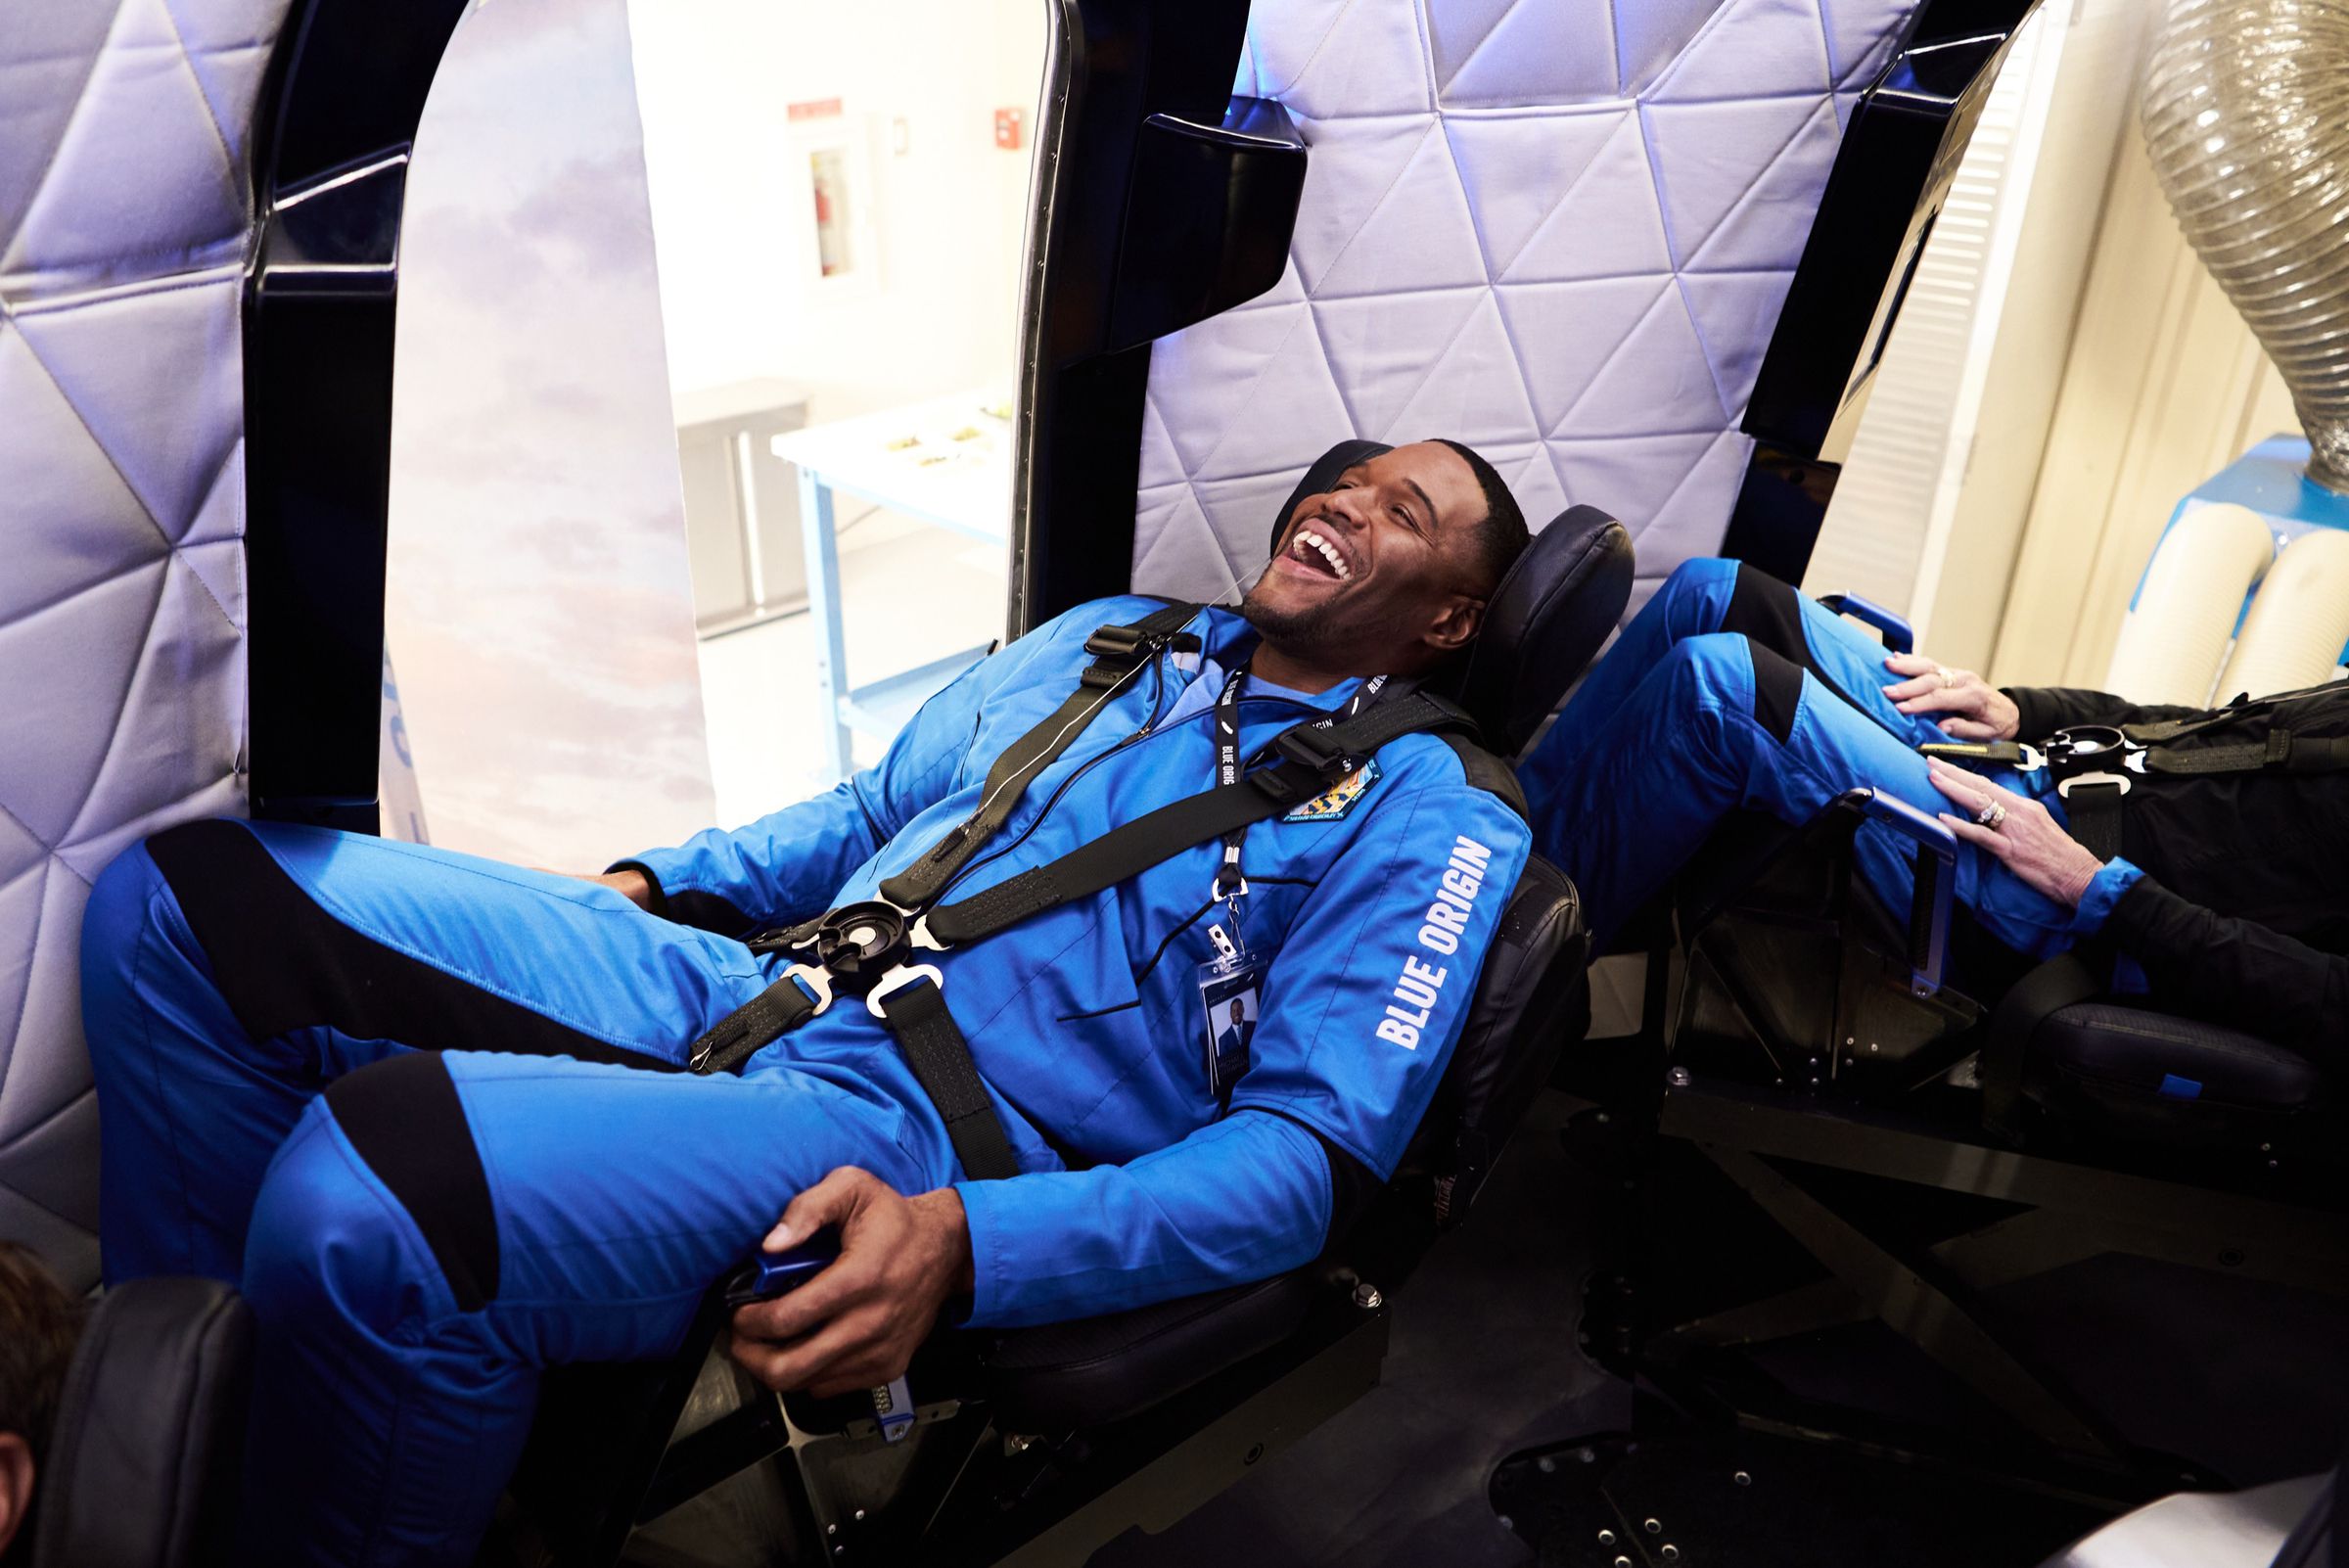 Michael Strahan training in one of New Shepard’s passenger seats